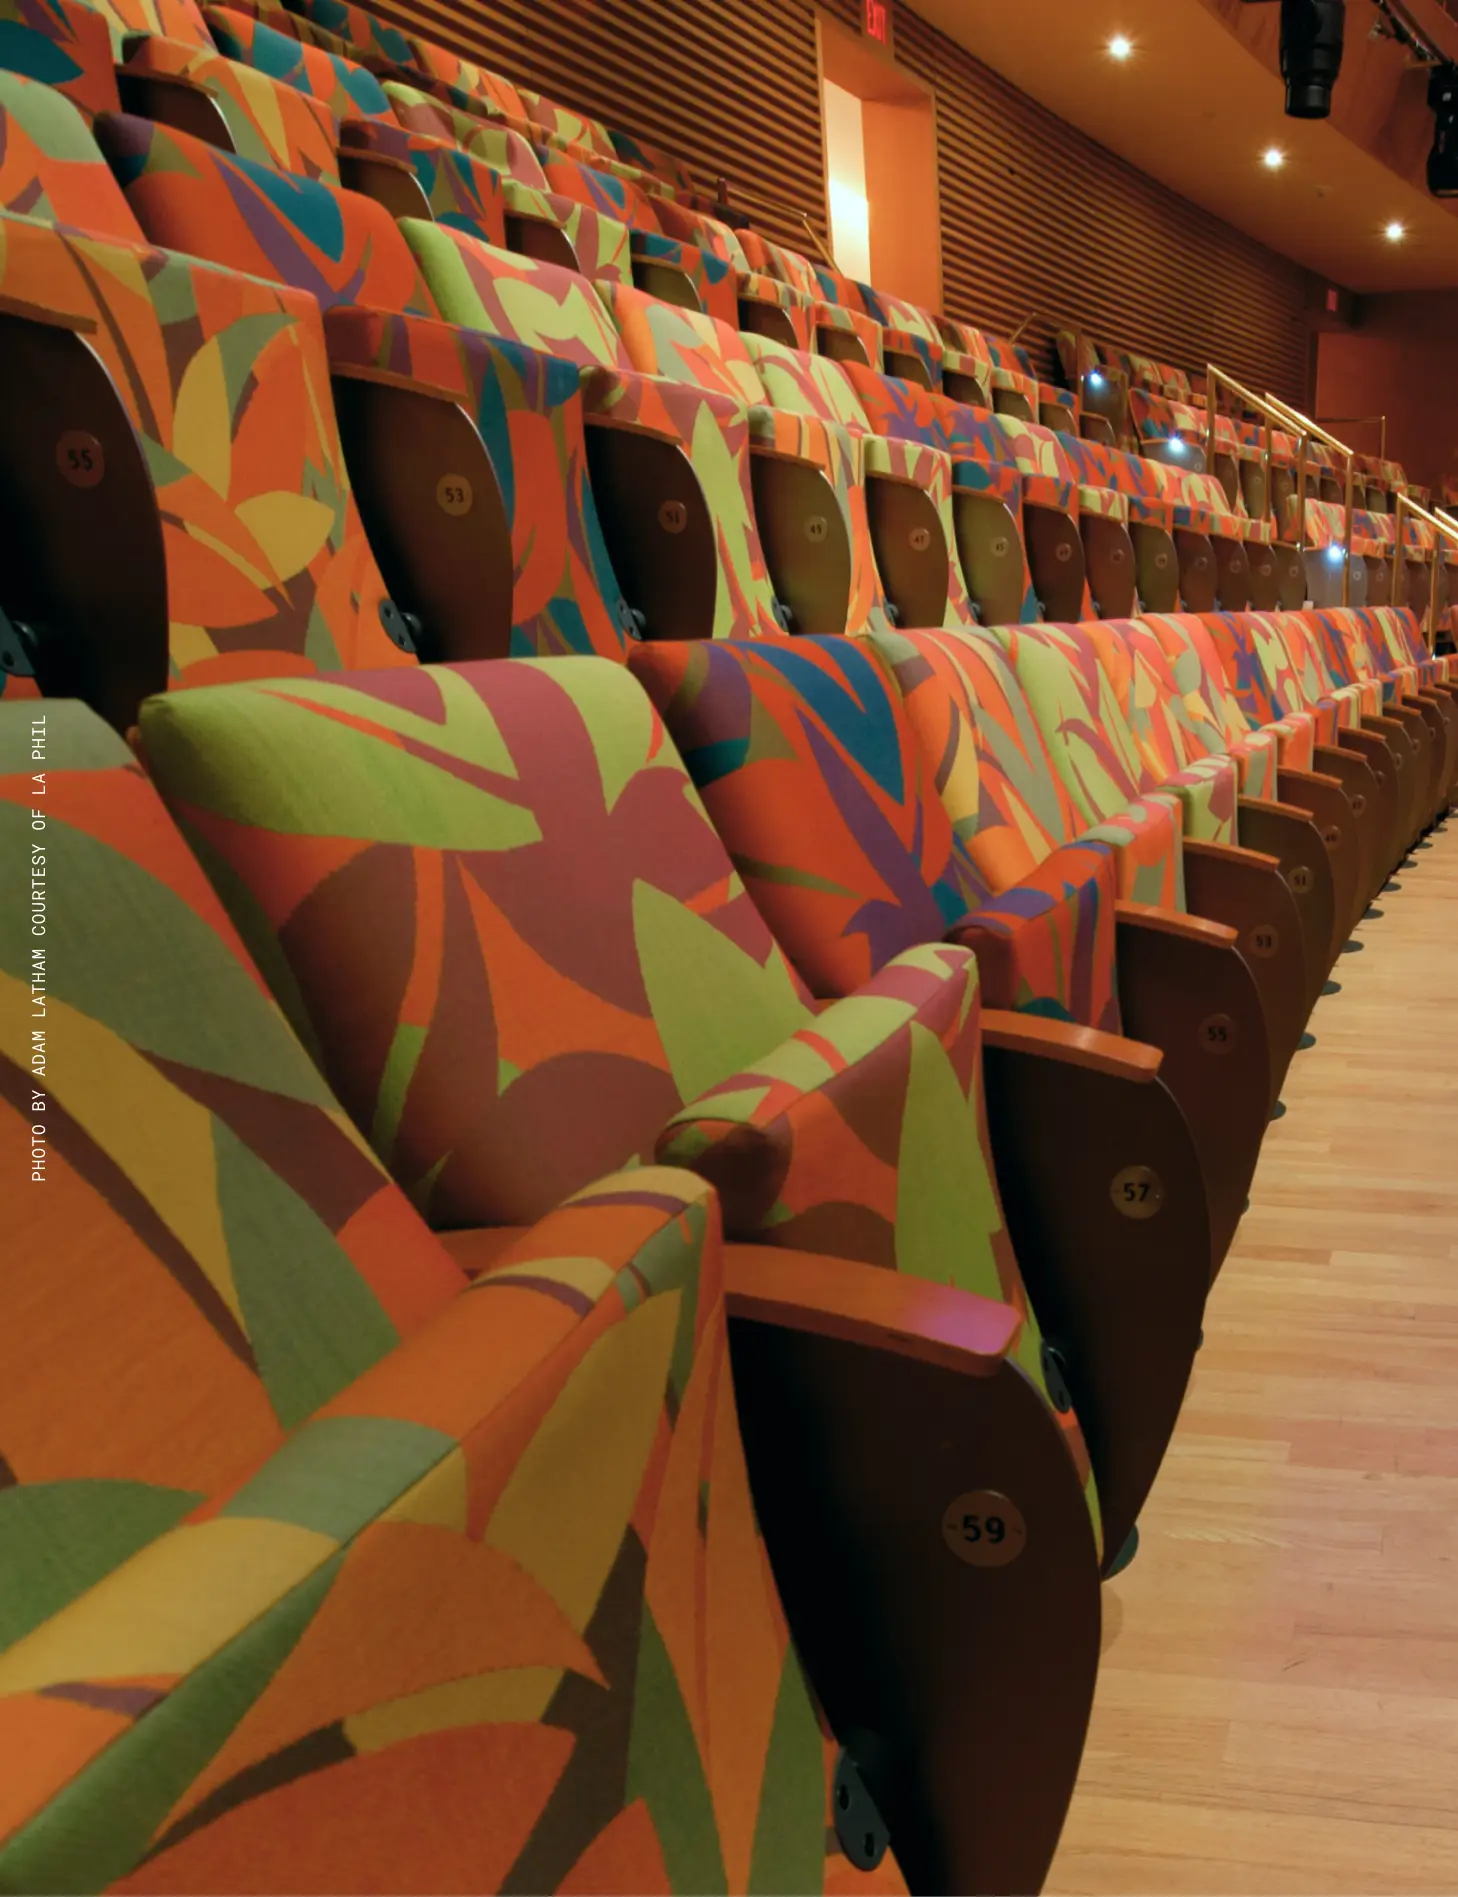 A view of the audience seating inside Walt Disney Concert Hall. Each seat has a colorful pattern in oranges, reds, greens, and purples that suggests an abstract floral motif.